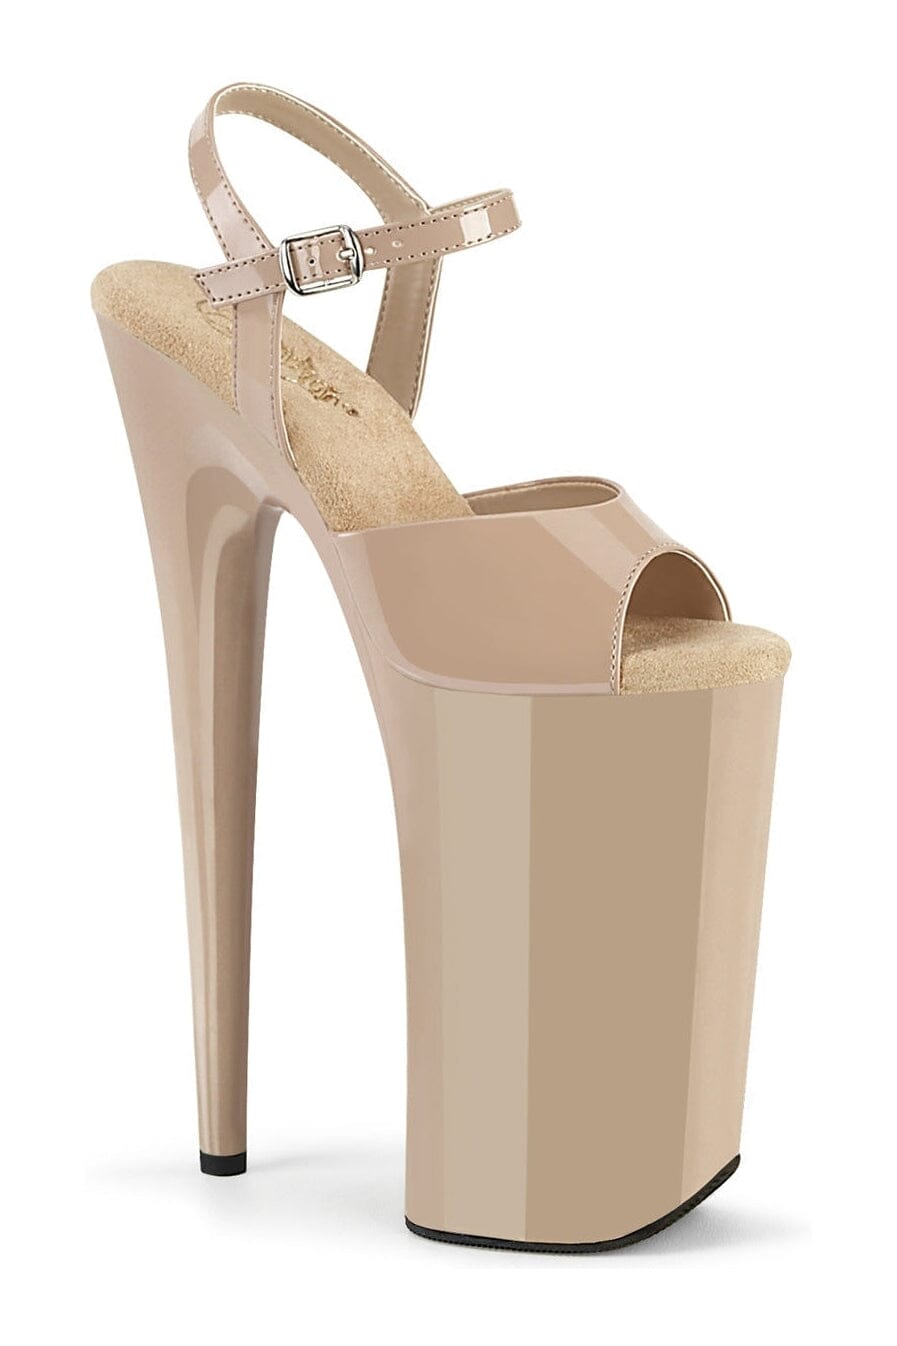 BEYOND-009 Nude Patent Sandal-Sandals-Pleaser-Nude-10-Patent-SEXYSHOES.COM